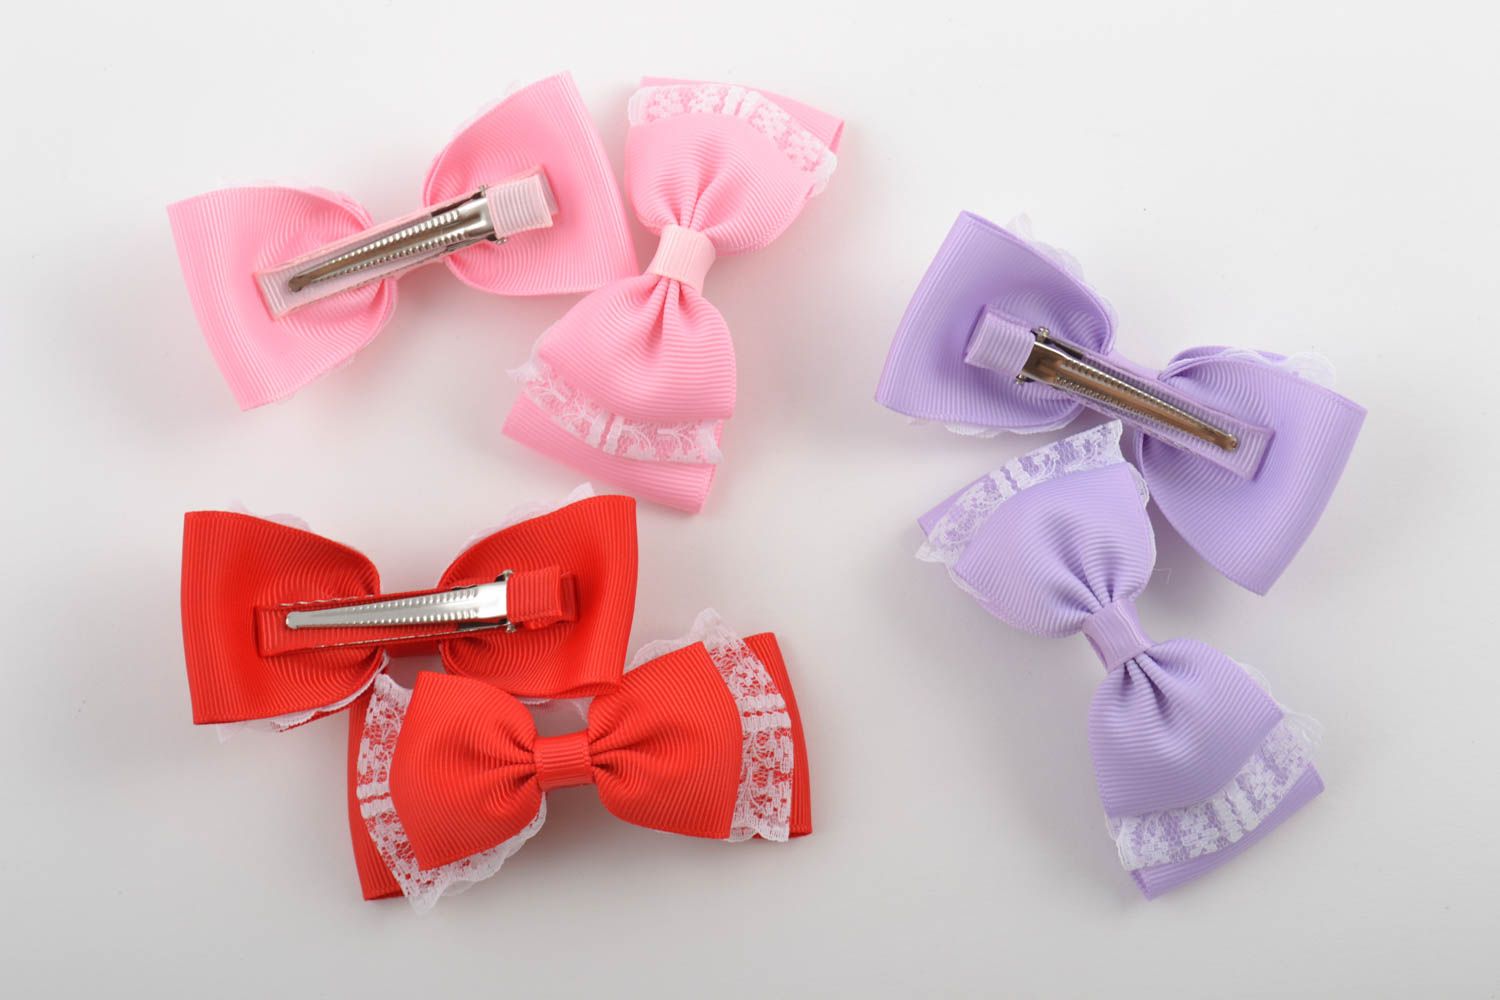 Baby hair bows set of 3 handmade hair clips gifts for baby girl hair decorations photo 2